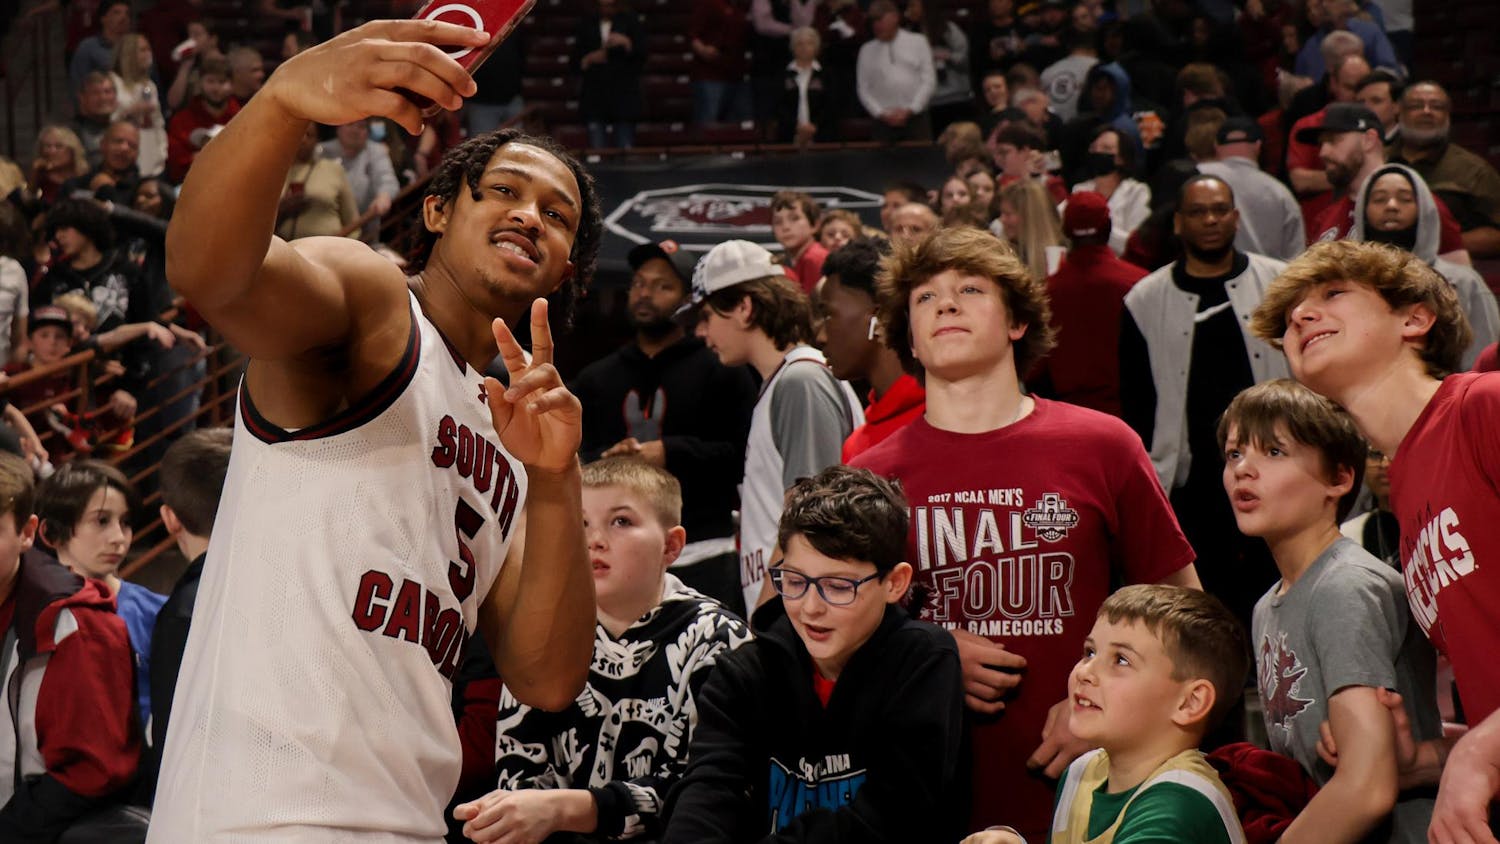 Junior guard Meechie Johnson takes pictures with fans after the Gamecock's 75-60 victory over Vanderbilt on Feb. 10. The Gamecocks are now 21-3 overall and 9-2 in SEC play.